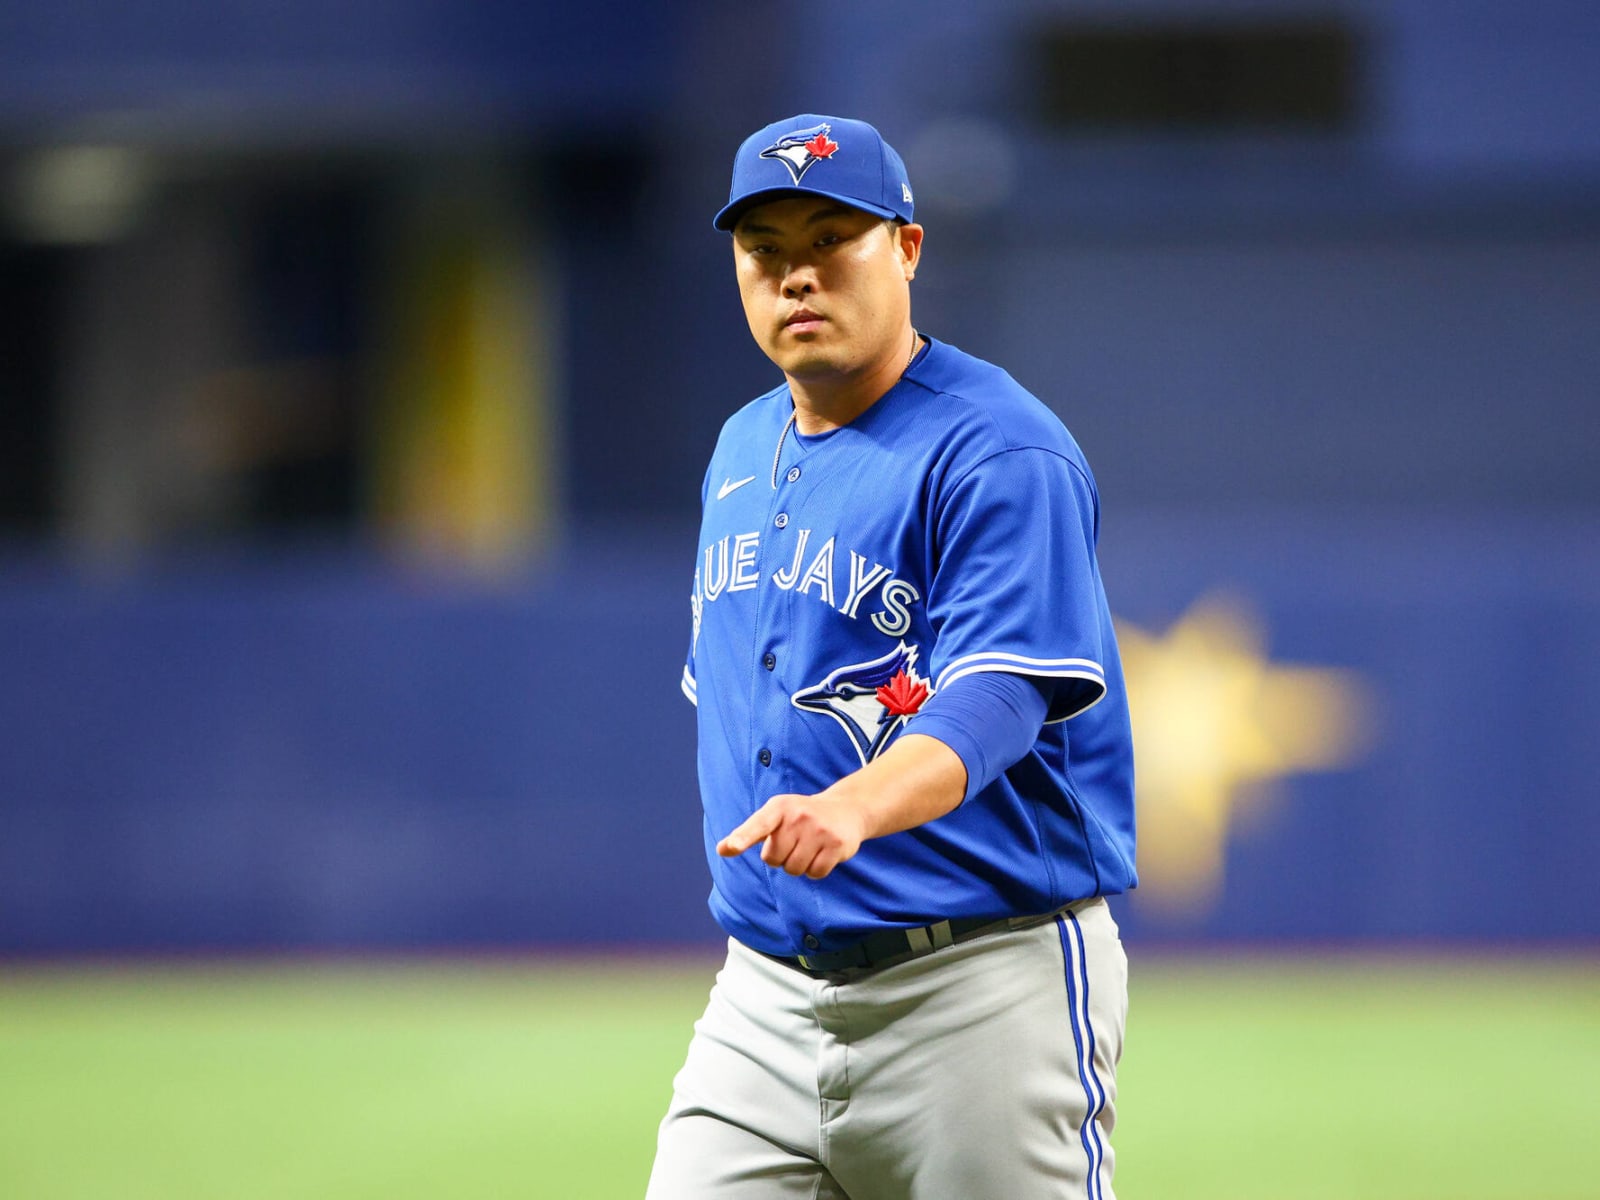 Hyun Jin Ryu logs 7 strikeouts in Blue Jays' win over Orioles